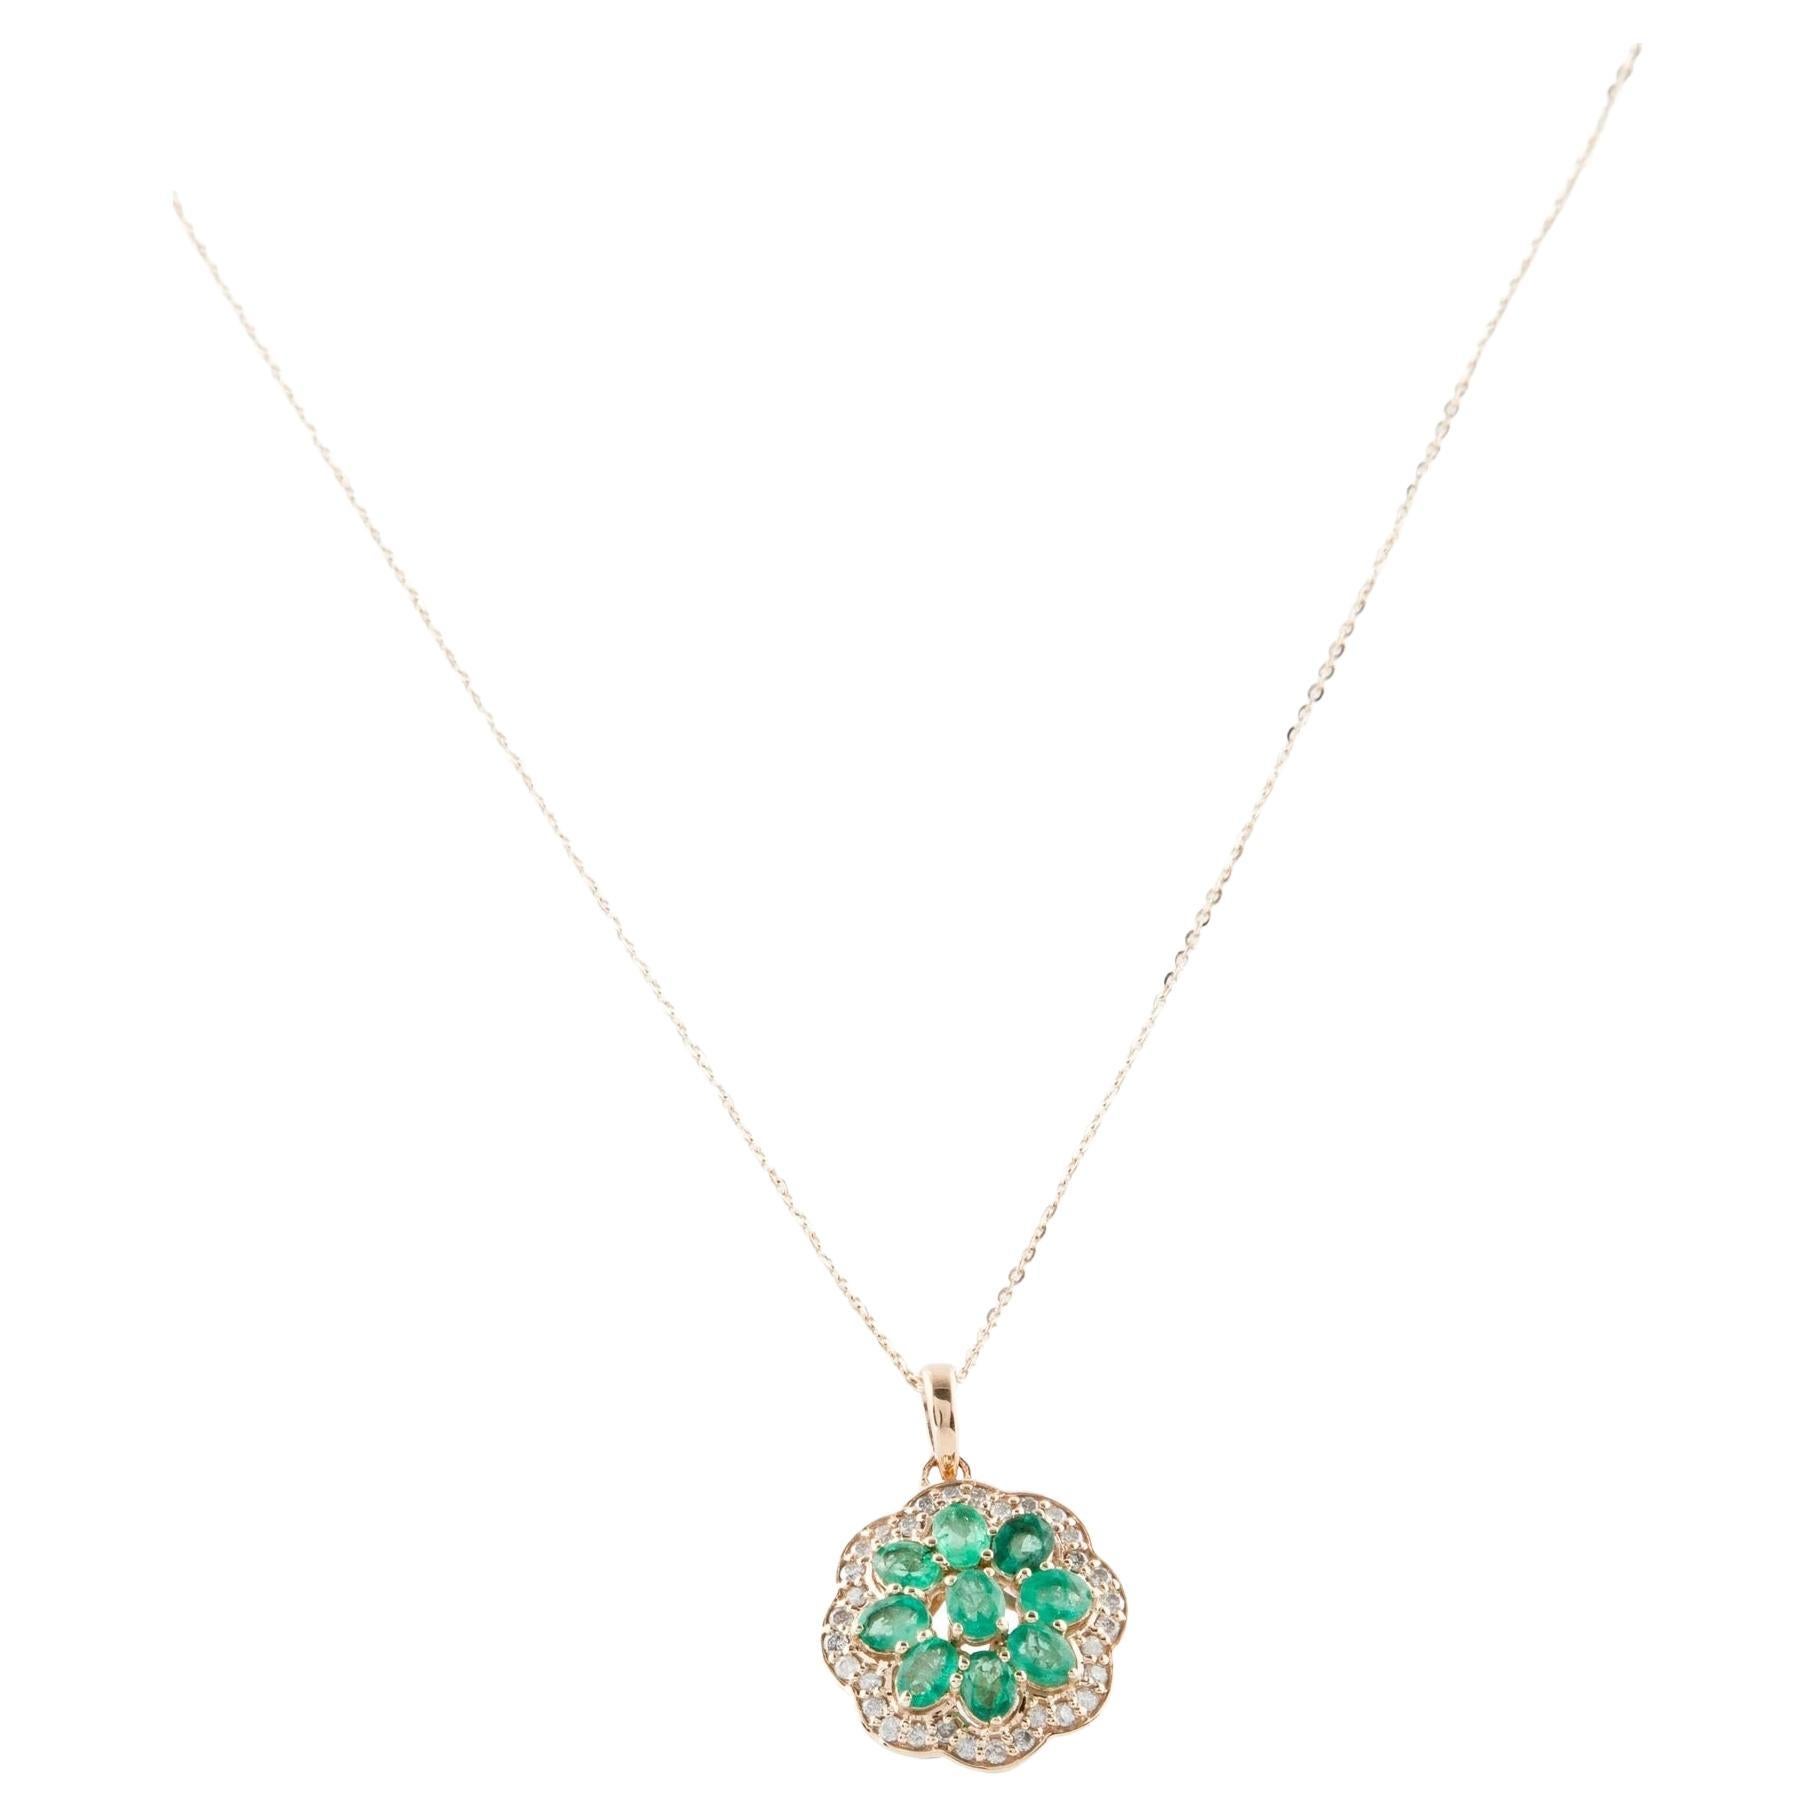 14K Emerald & Diamond Pendant Necklace  Faceted Oval Emerald  Near Colorless D For Sale